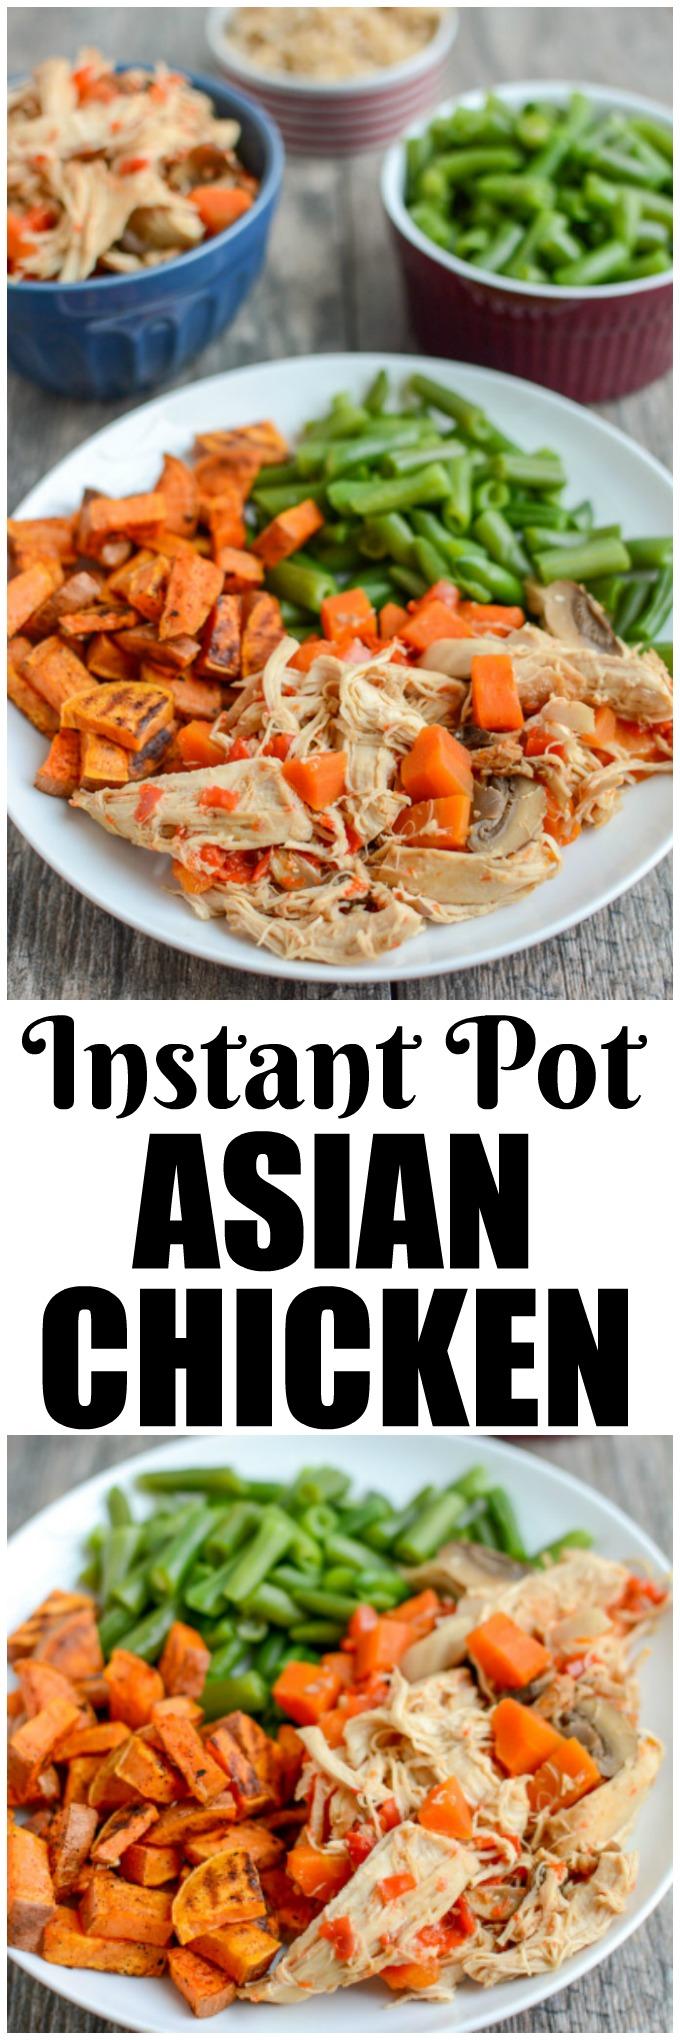 This Instant Pot Asian Chicken can also be made in a slow cooker. It's full of flavor and easy to make. A healthy dinner the whole family will love!